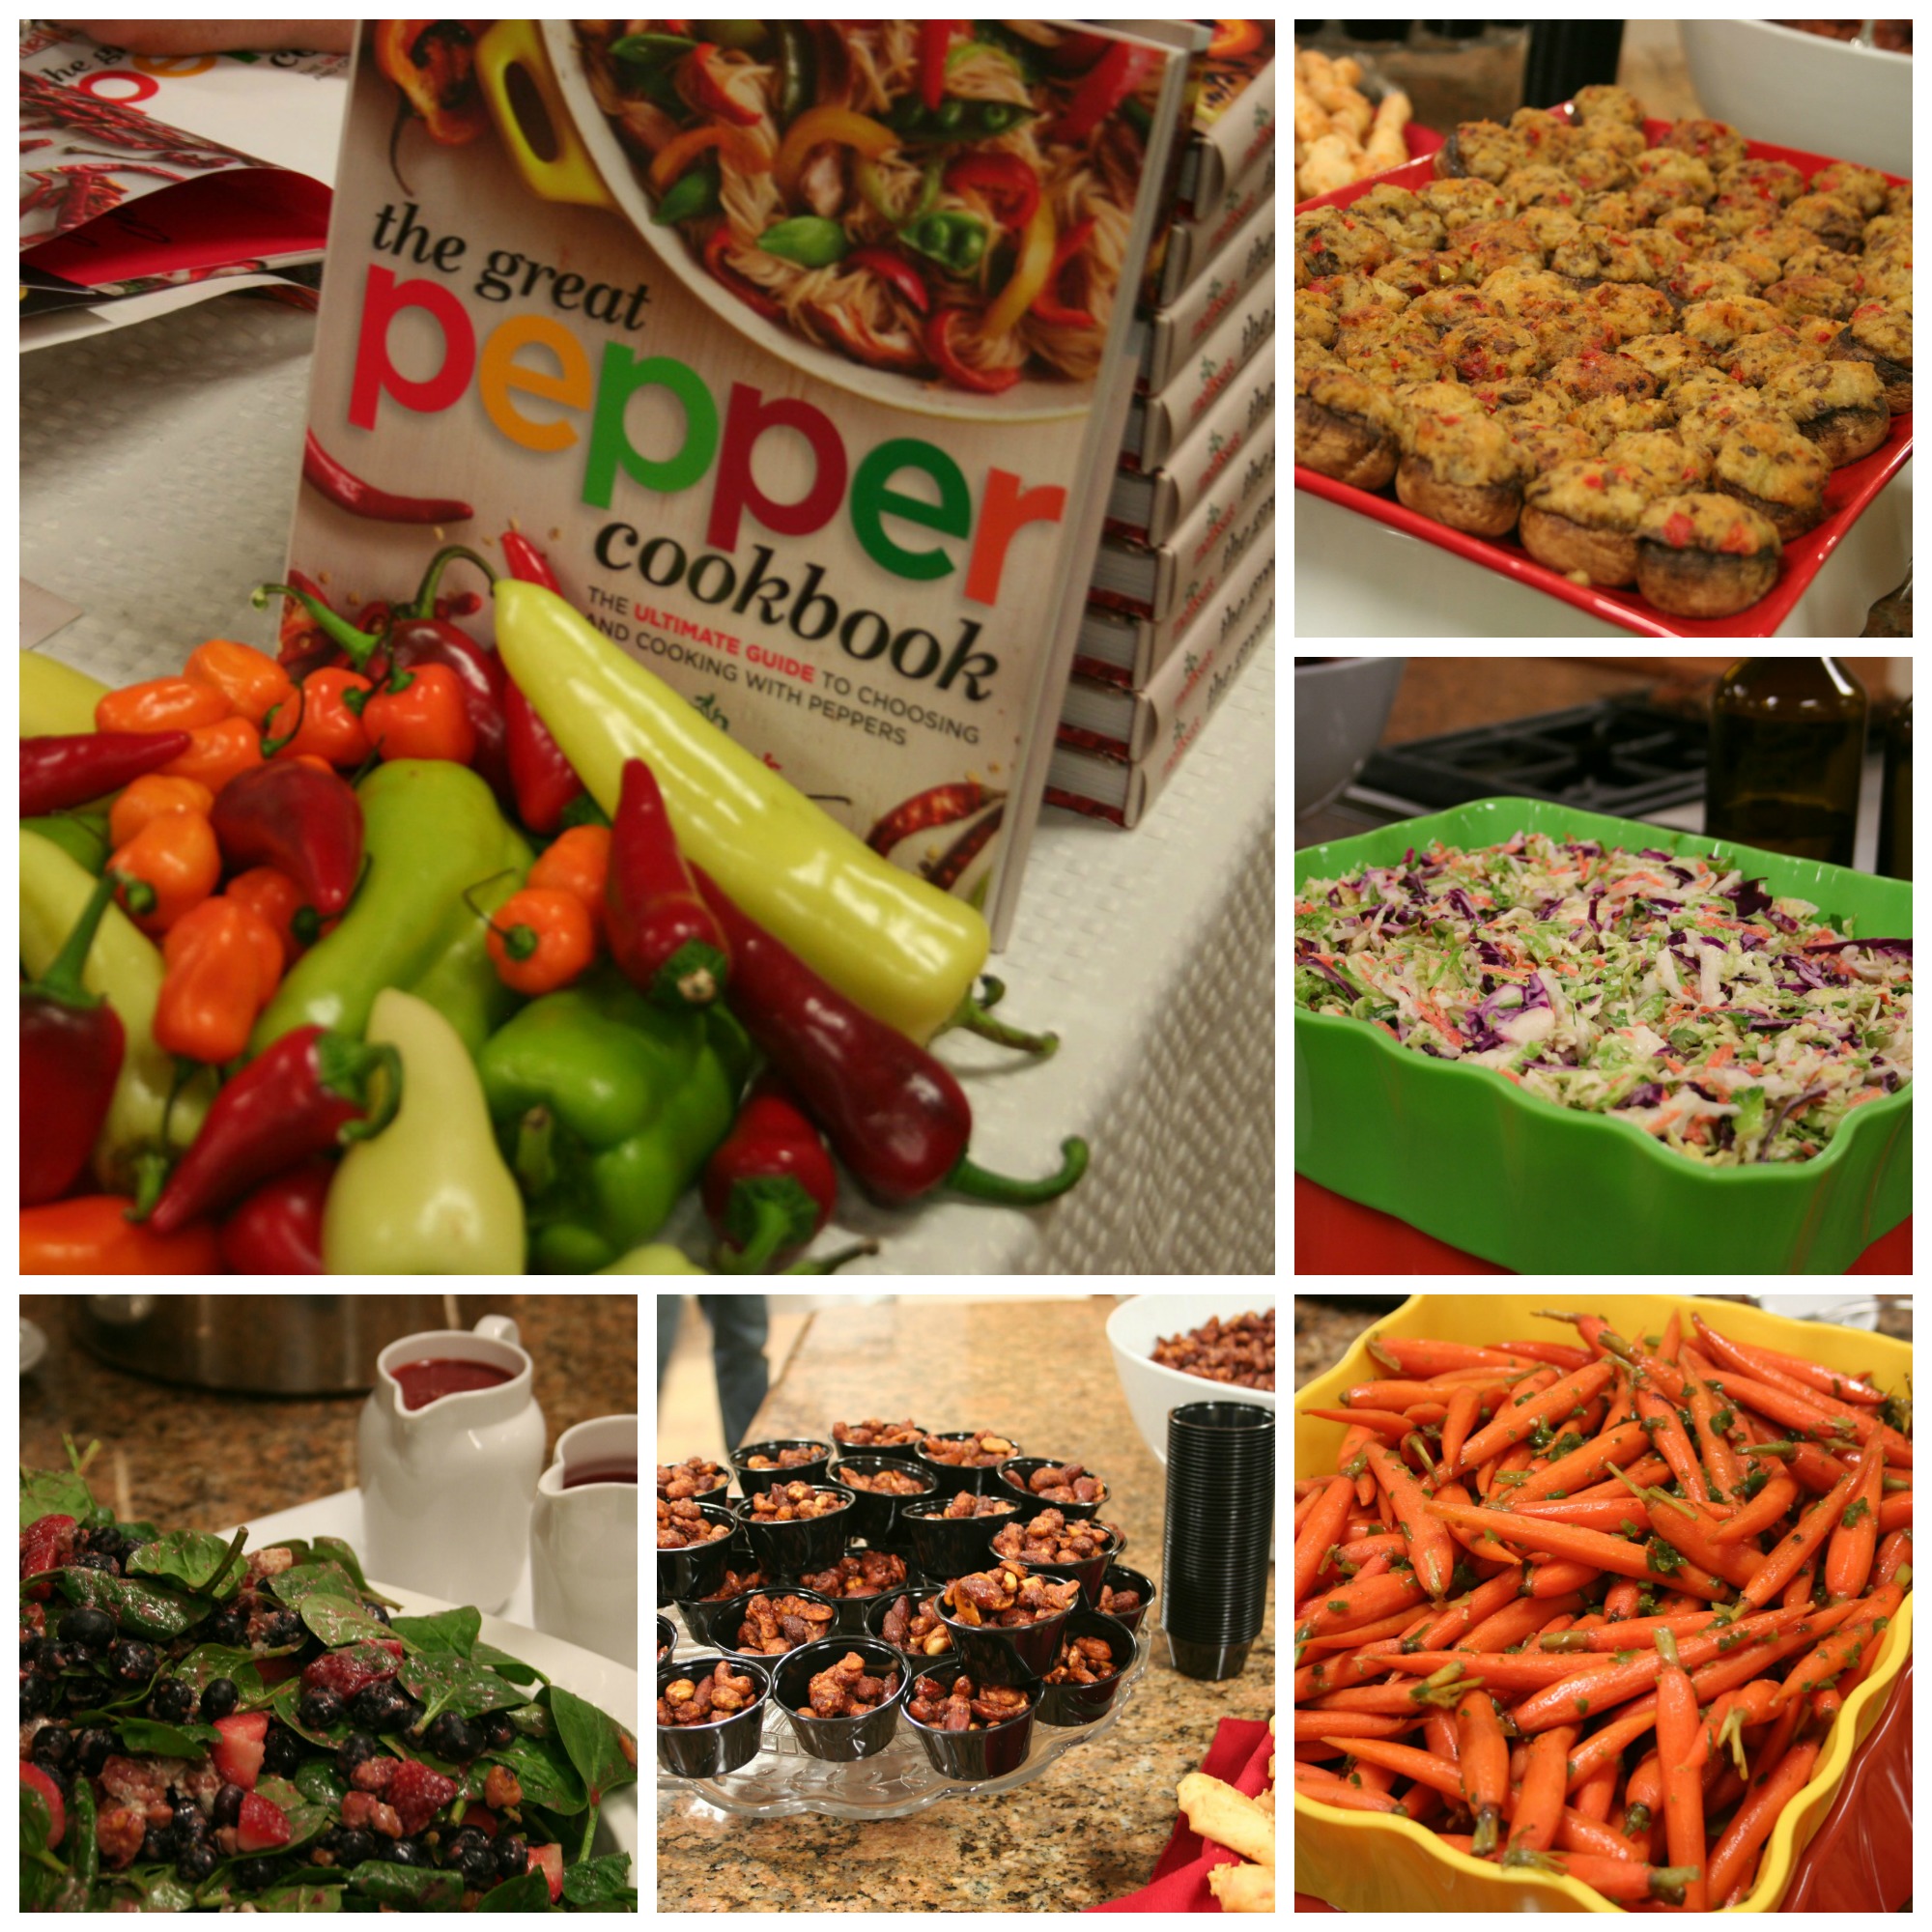 The Great Pepper Cookbook by Melissa's Produce